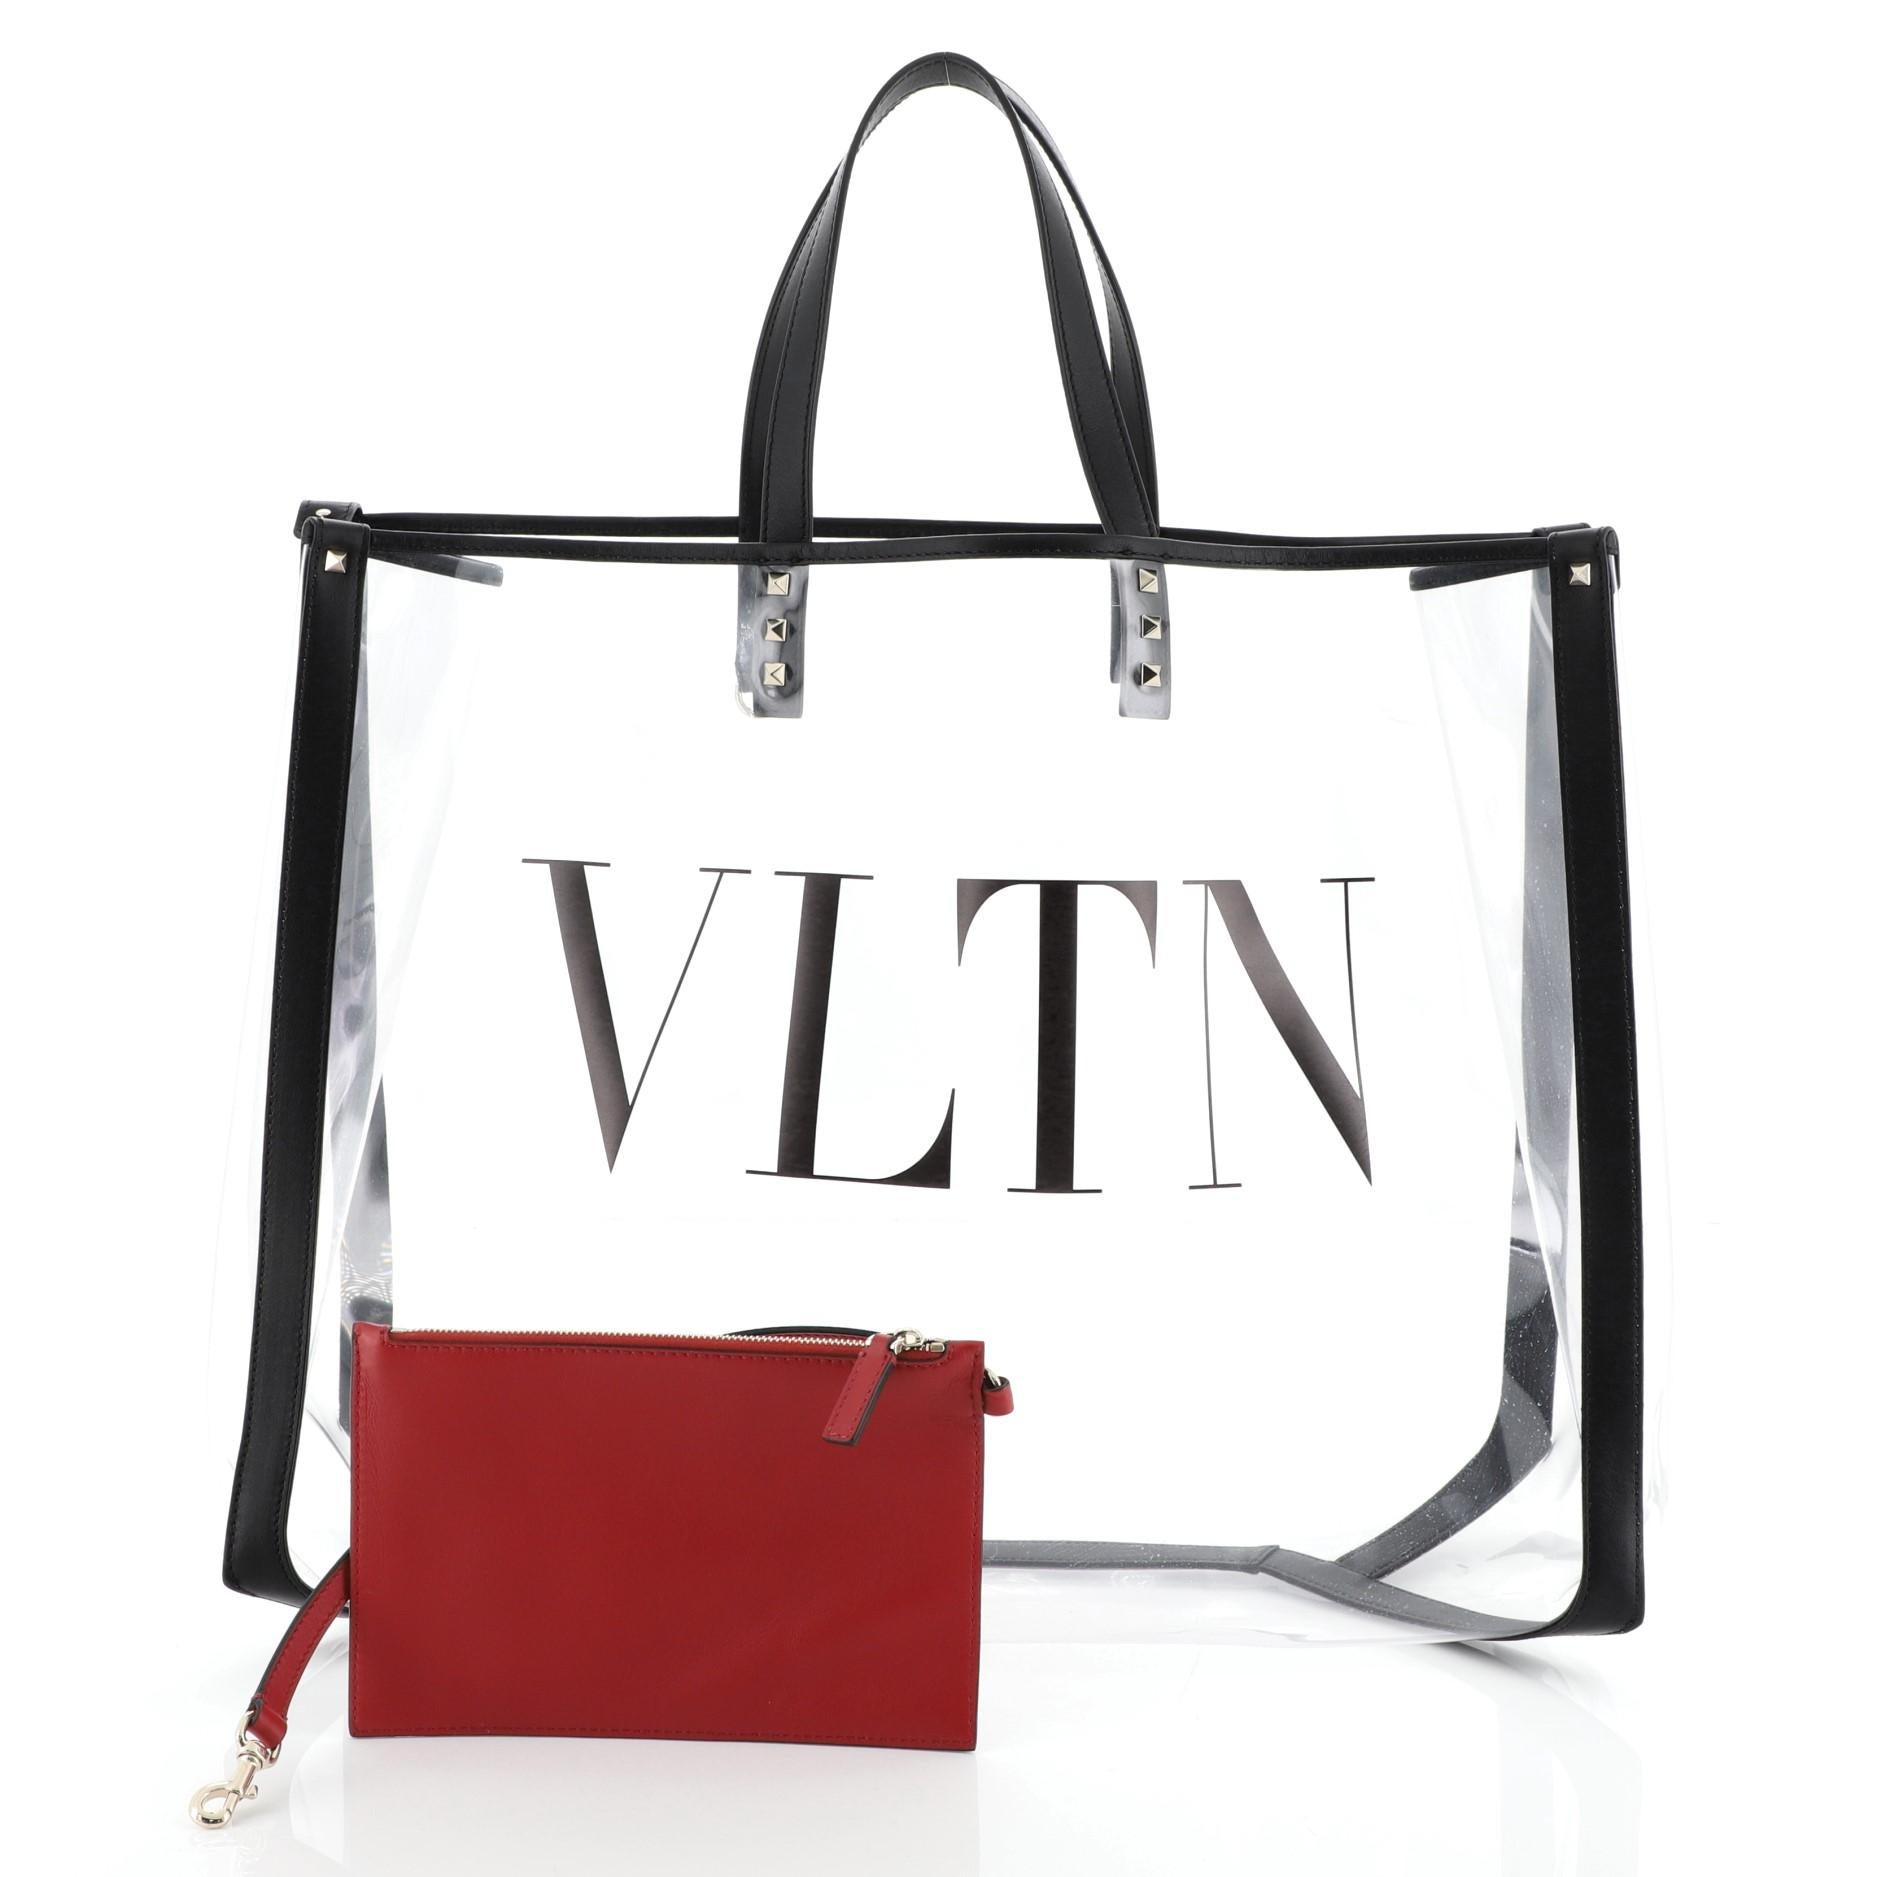 This Valentino Grande Plage VLTN Tote PVC Large, crafted from clear PVC, features dual flat handles, VLTN printed lettering at front and silver-tone hardware. It opens to a clear PVC interior. 

Estimated Retail Price: $1,175
Condition: Excellent.